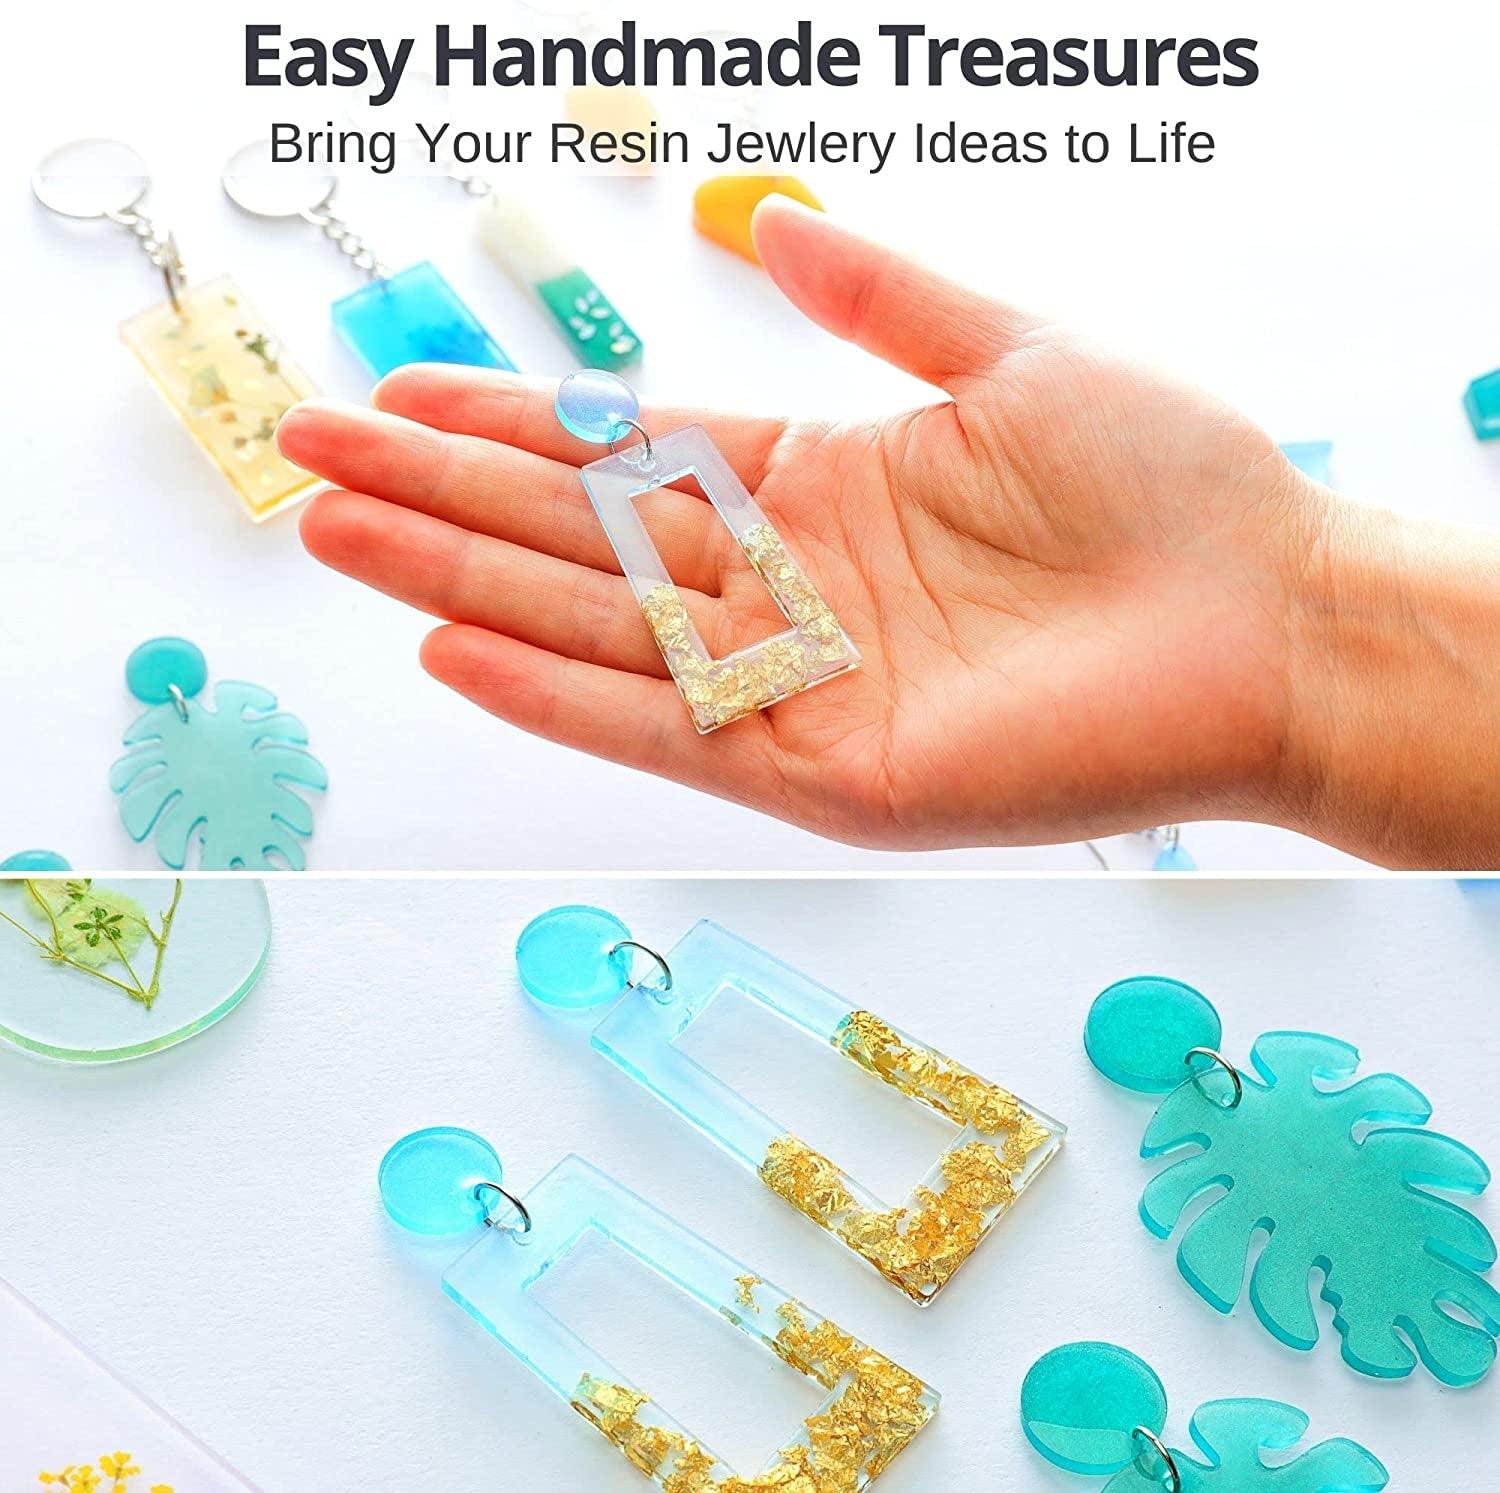 IGaiety Resin Kits for Jewelry Making Silicone Molds Starter Kit 278 Pcs Bundle with Epoxy Resin Silicone Mold Art for DIY Jewelry Earring Keychain